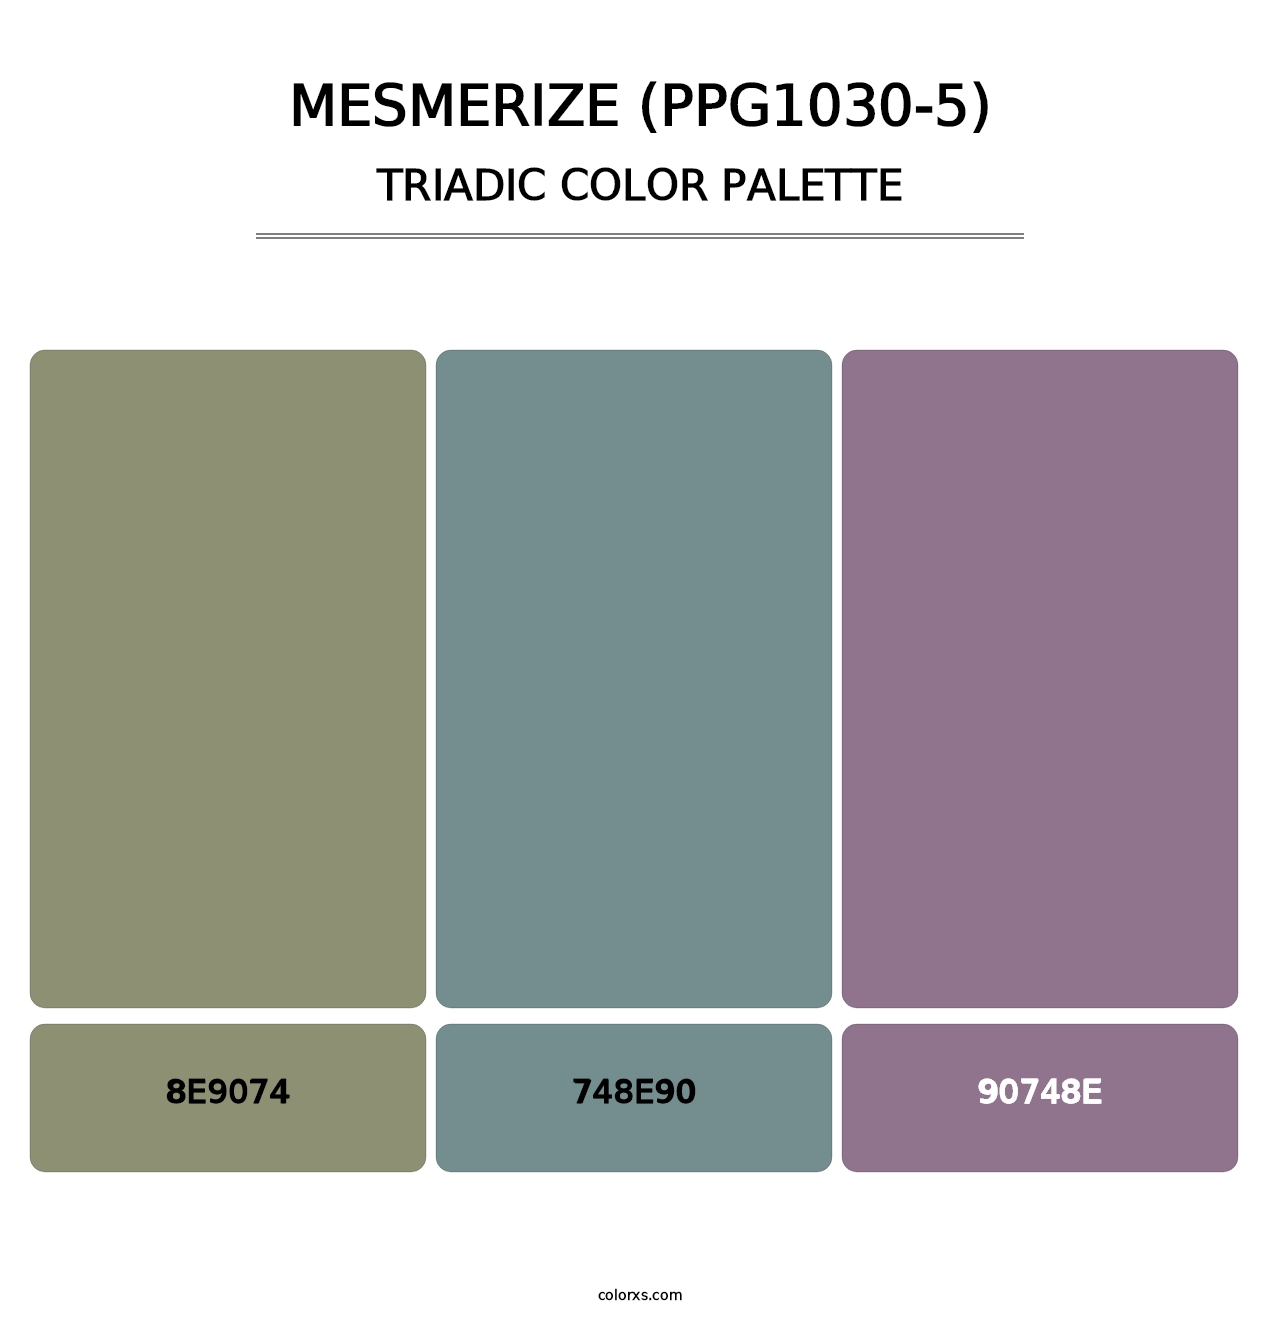 Mesmerize (PPG1030-5) - Triadic Color Palette